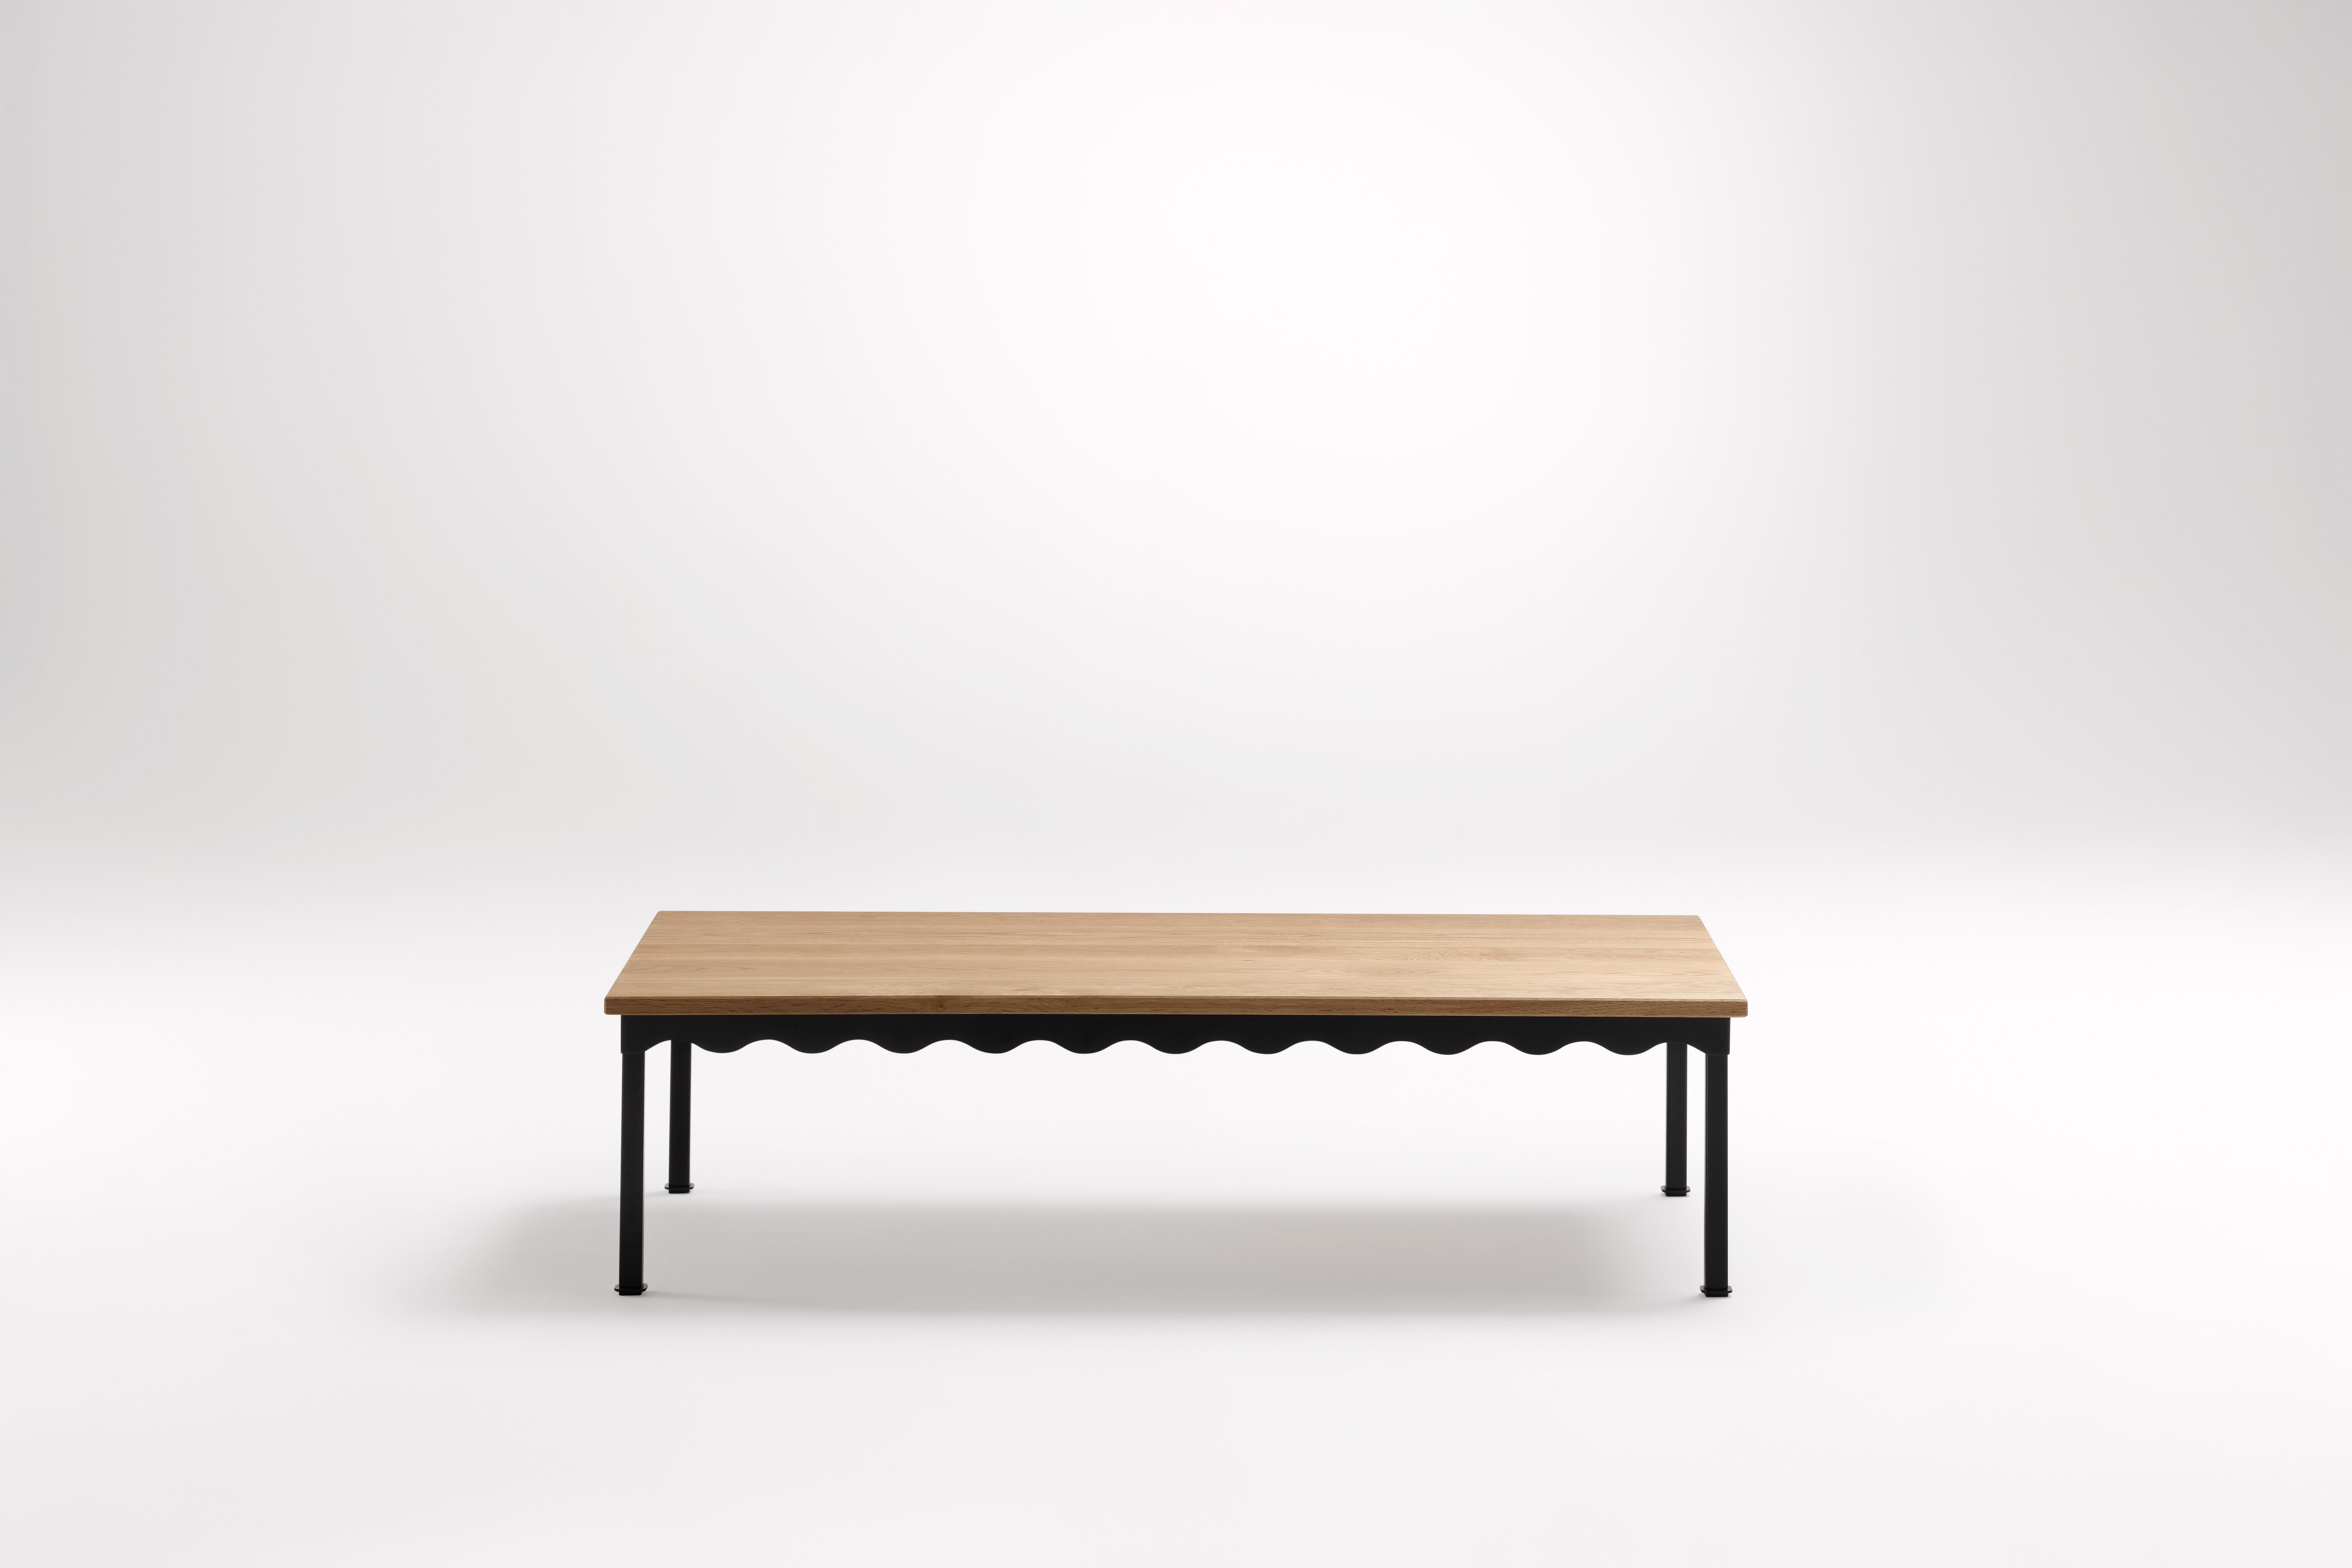 American Oak Bellini Coffee Table by Coco Flip
Dimensions: D 126 x W 66 x H 32 cm
Materials:  Timber / Stone tops, Powder-coated steel frame. 
Weight: 20kg
Frame Finishes: Textura Black.

Coco Flip is a Melbourne based furniture and lighting design